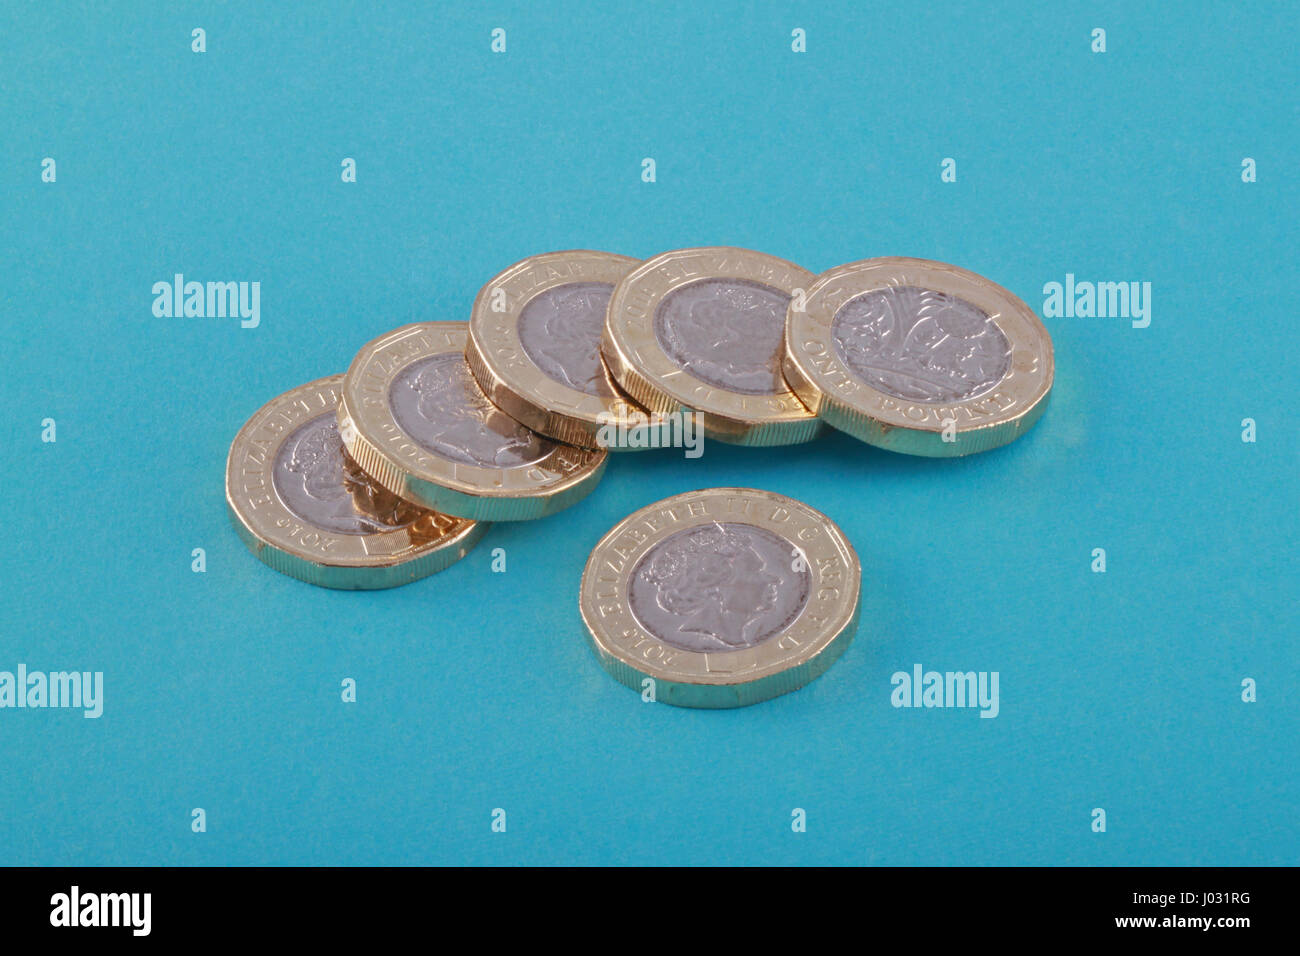 New British, UK one pound coins on a blue background. It was released into circulation on March 28 2017. Stock Photo